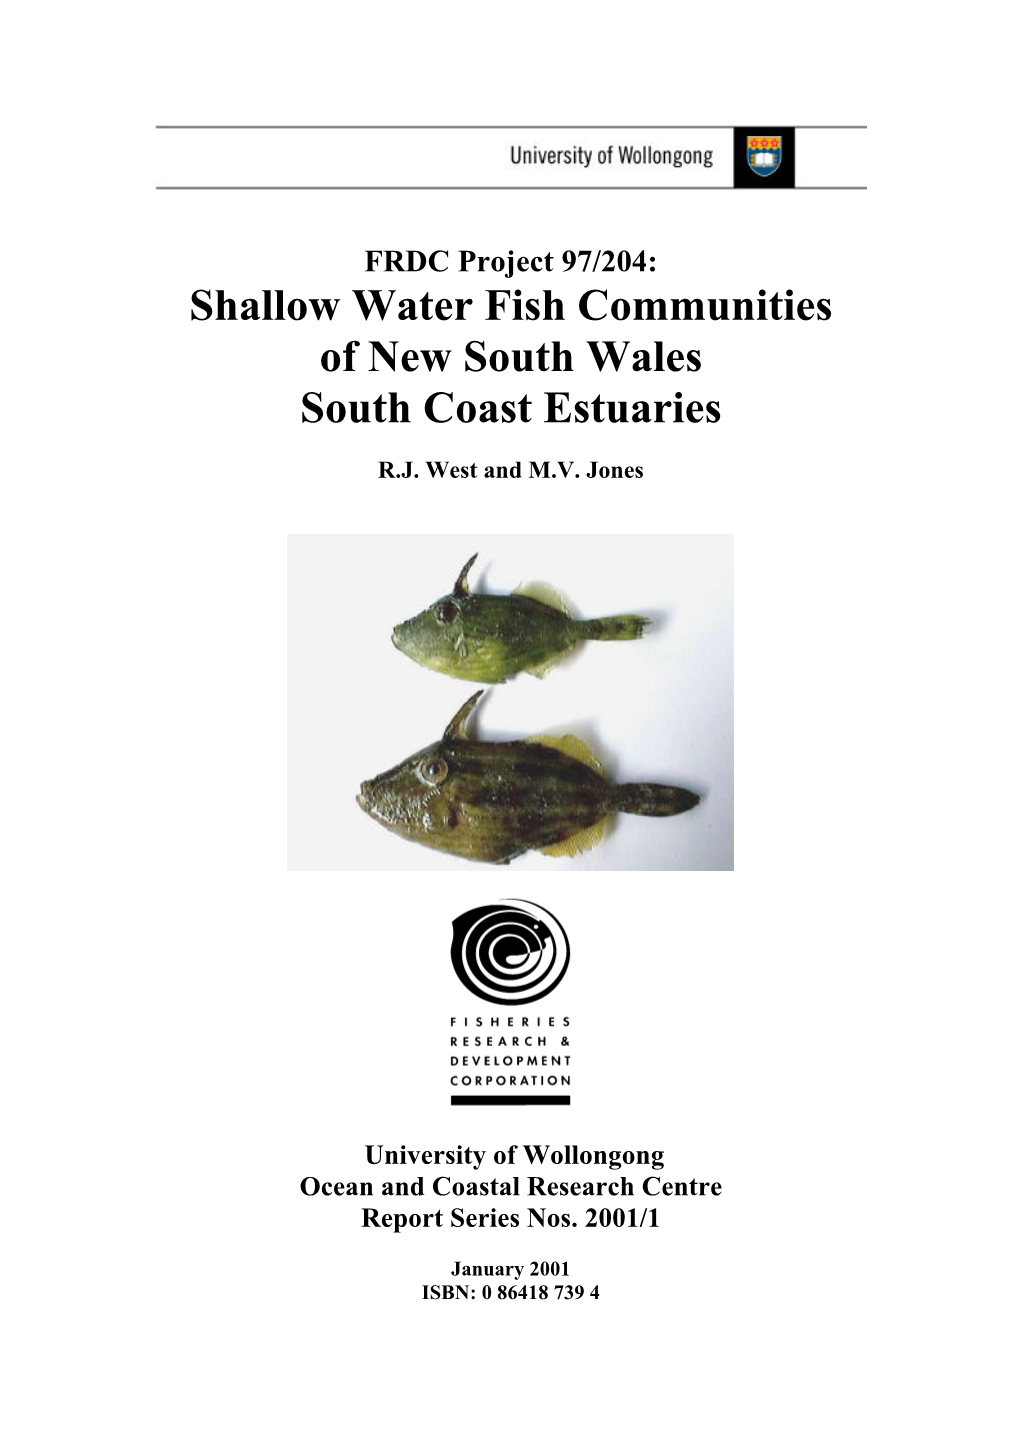 Shallow Water Fish Communities of New South Wales South Coast Estuaries